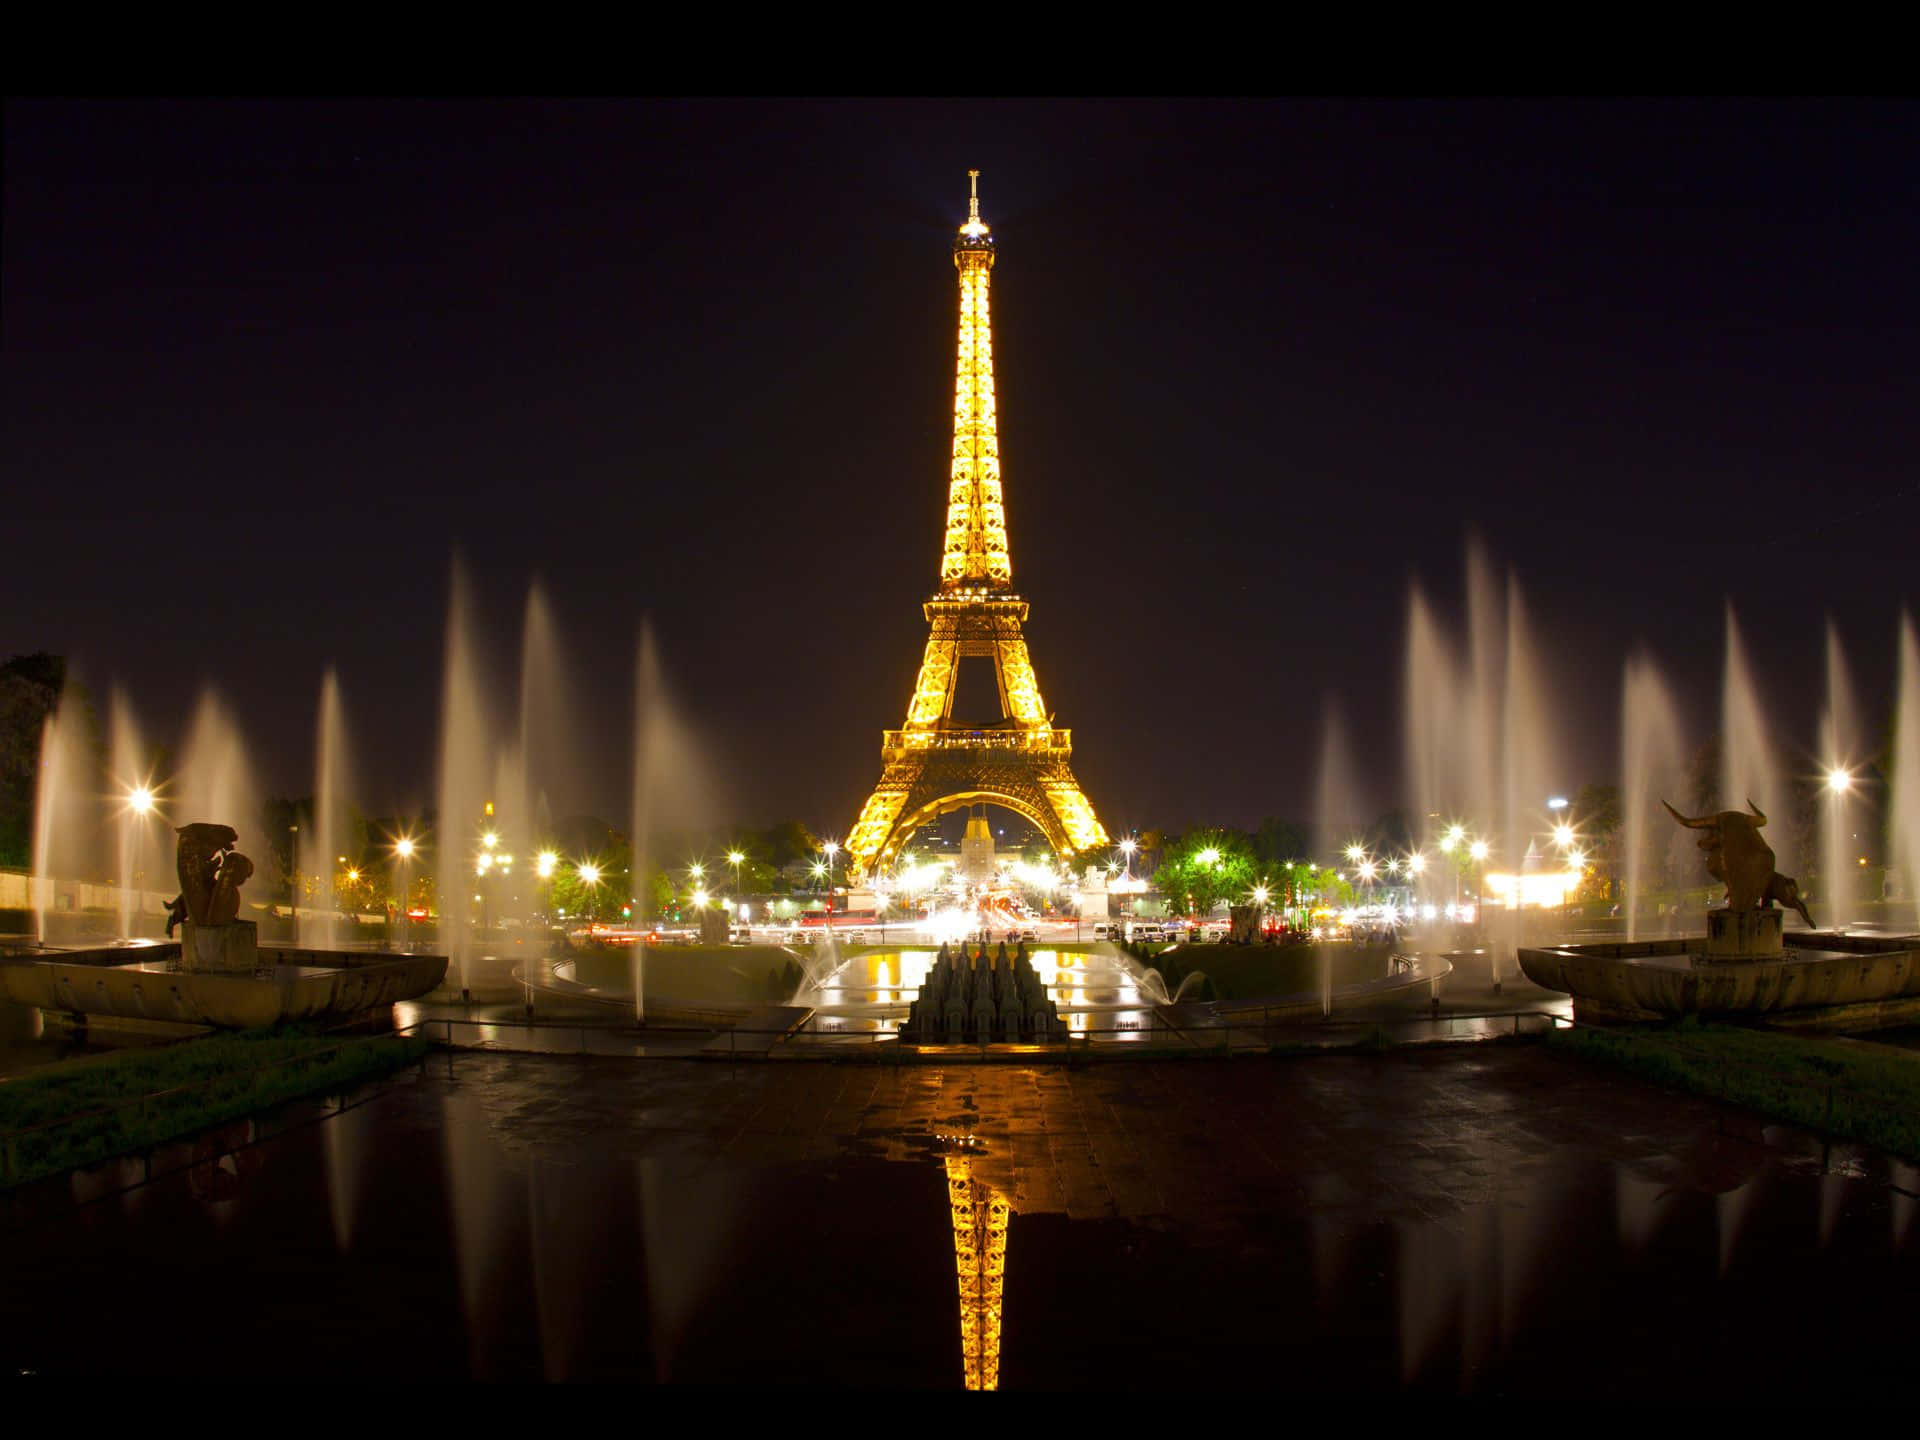 “The City of Lights at Night” Wallpaper